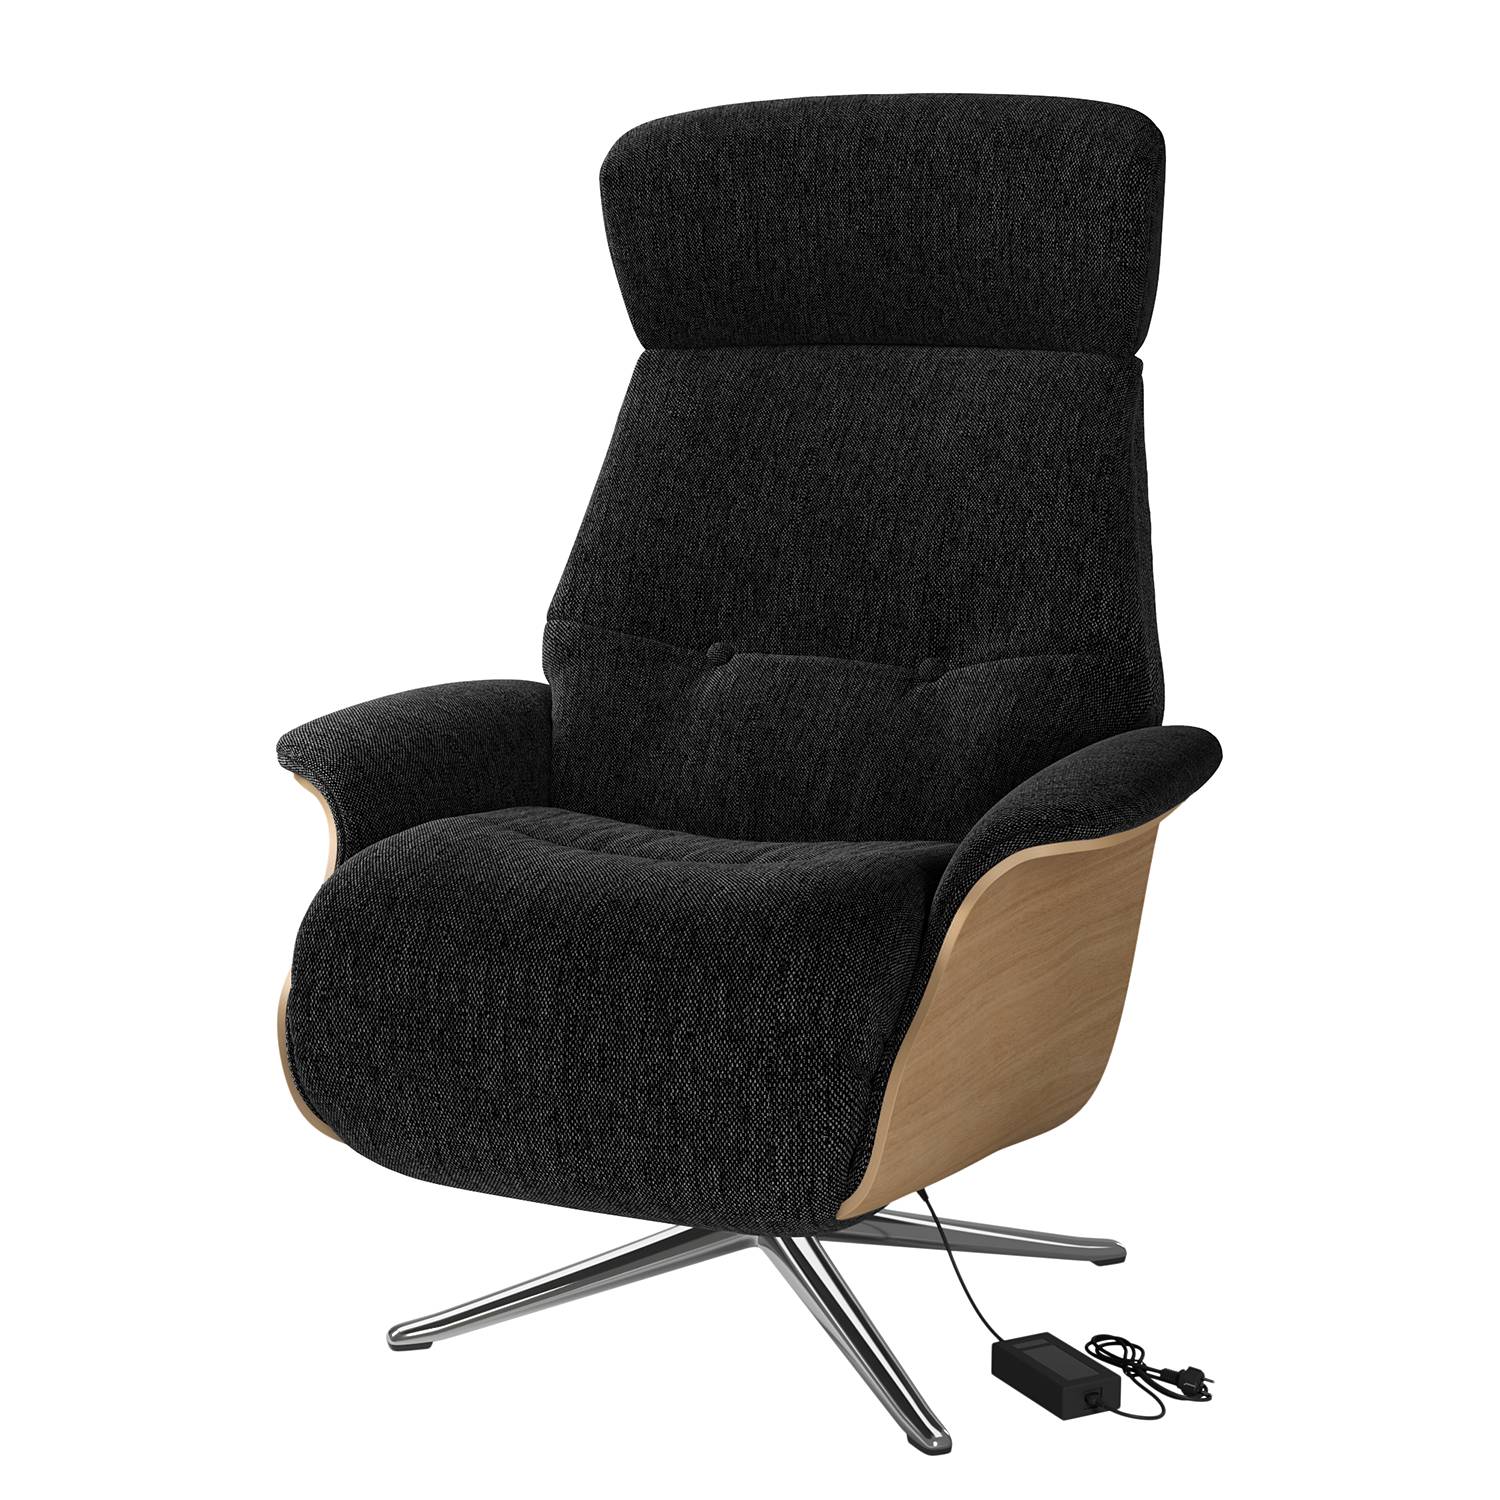 Image of Fauteuil relax Anderson III 000000001000131448